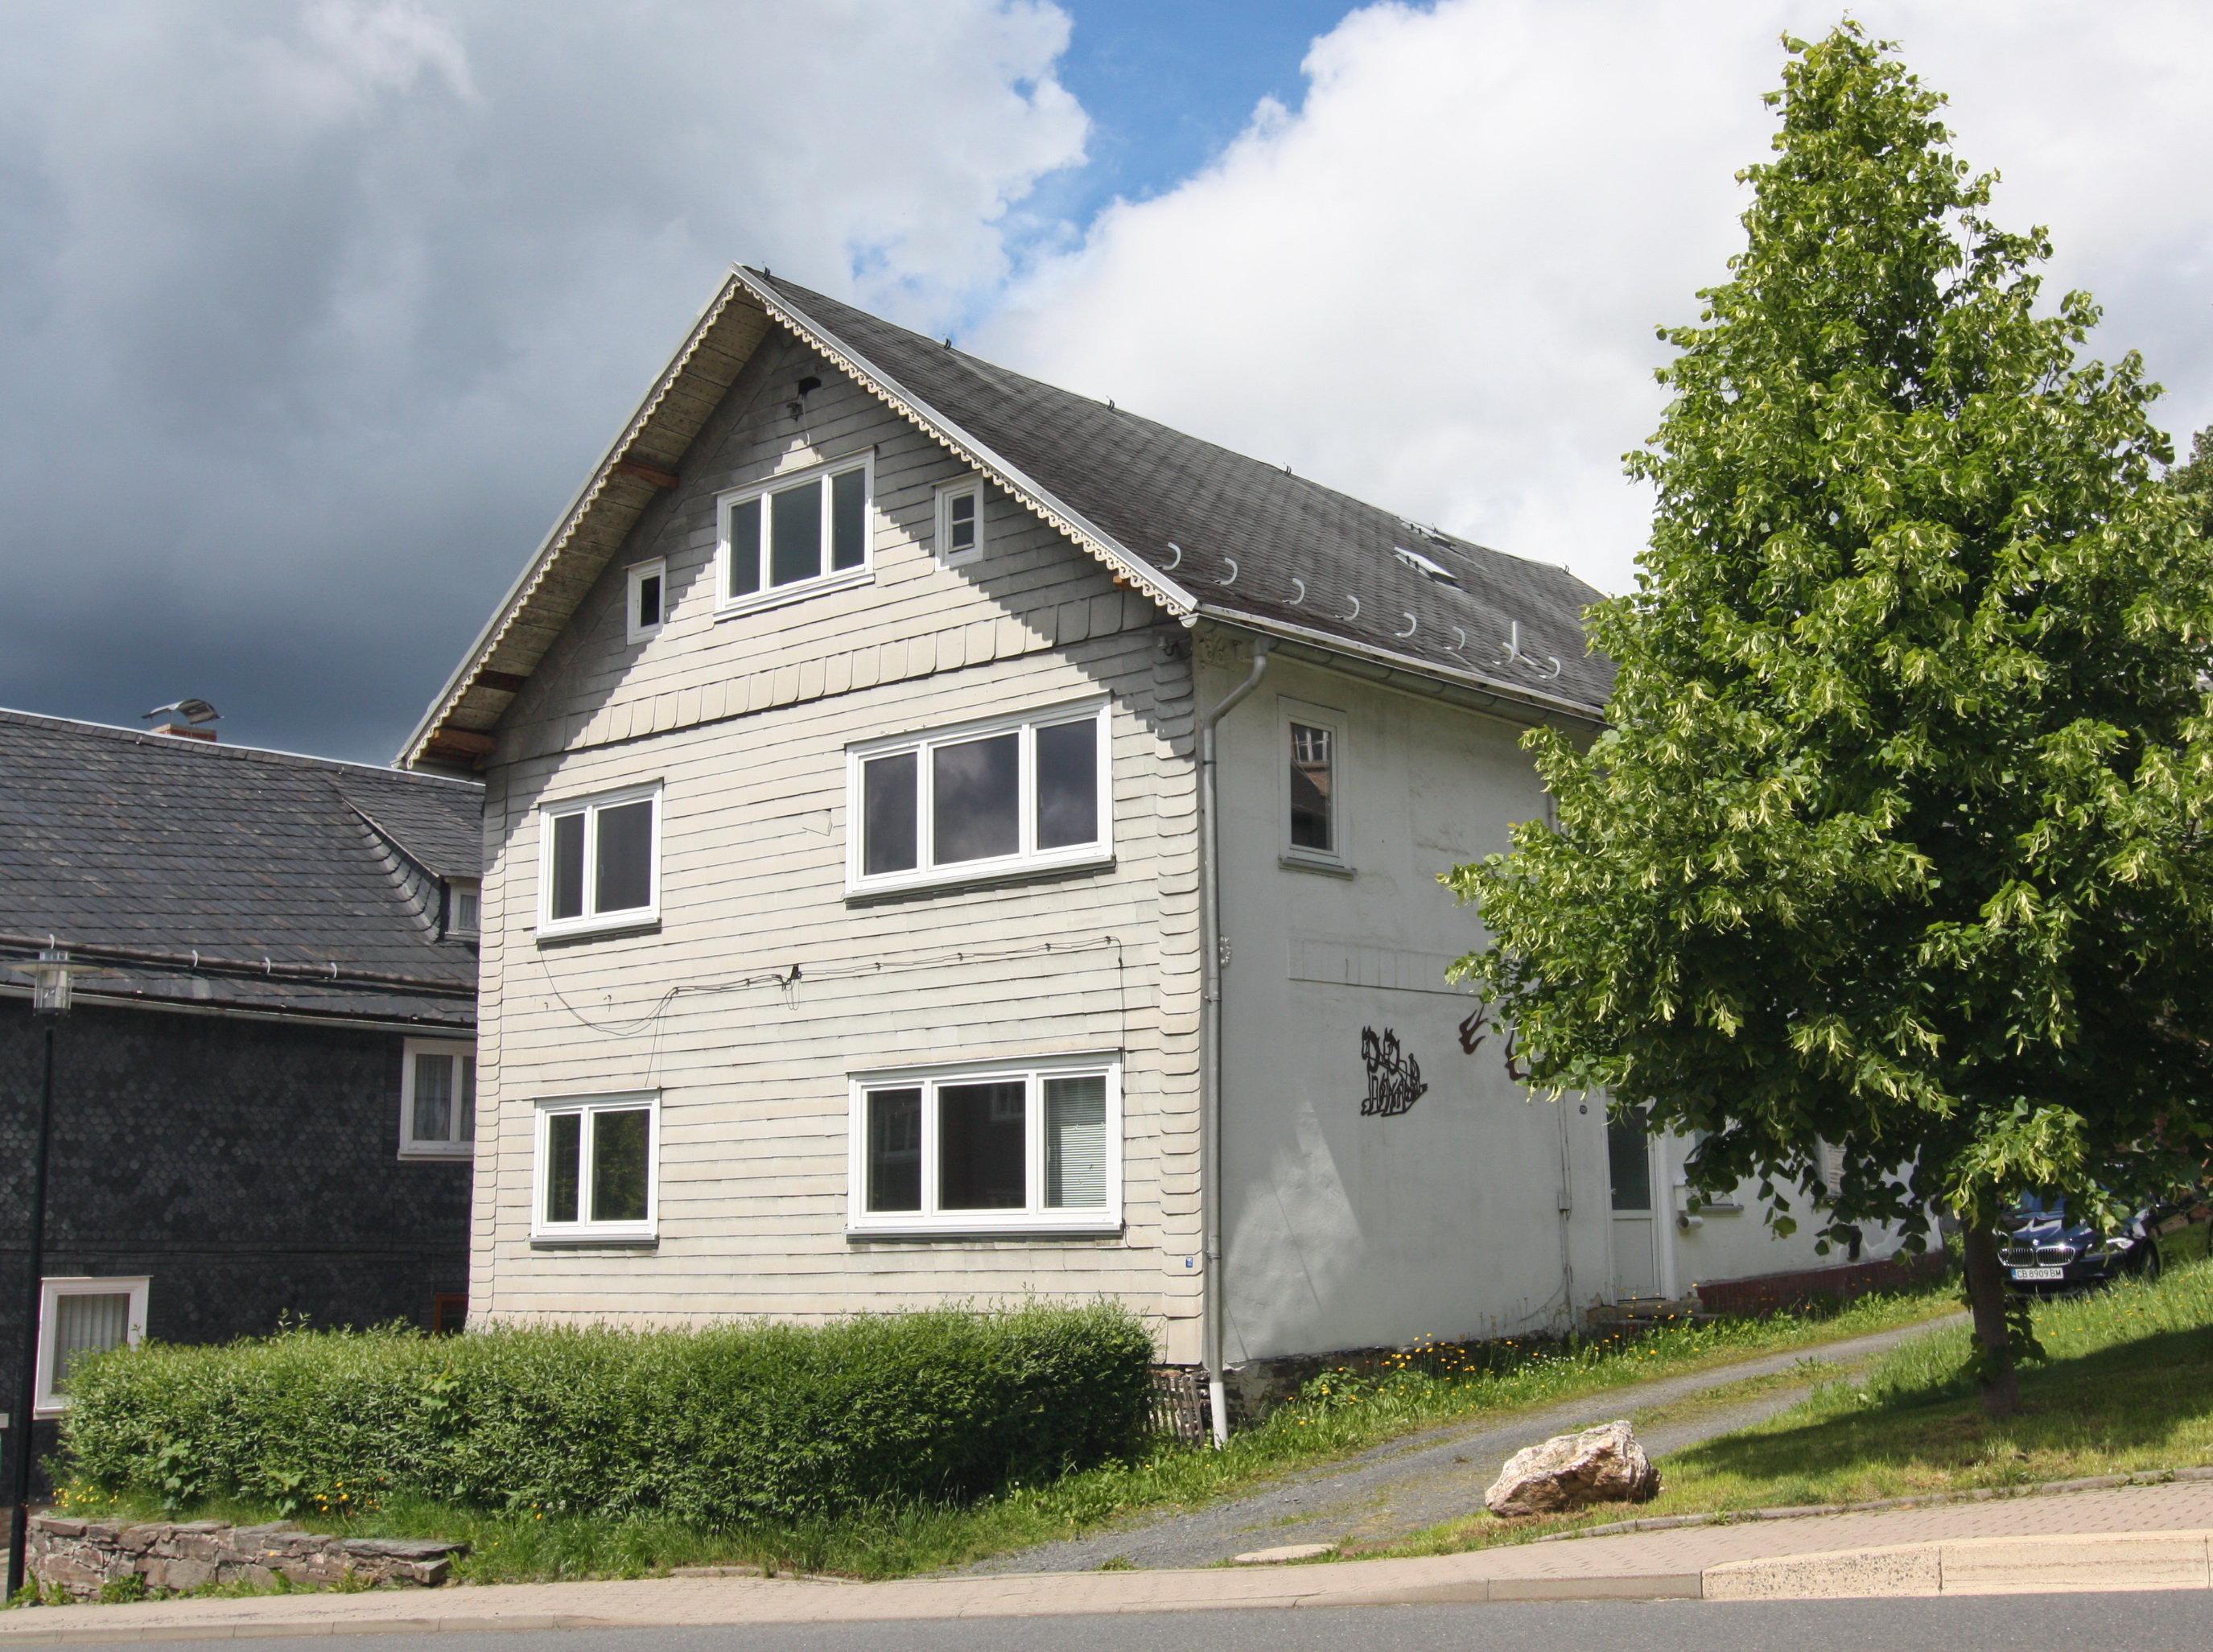 MEUSELBACH-SCHWARZM.HLE, GERMANY - HUGE 50 ROOM HOUSE(S) PUB AND WORKSHOPS 1/2 ACRE